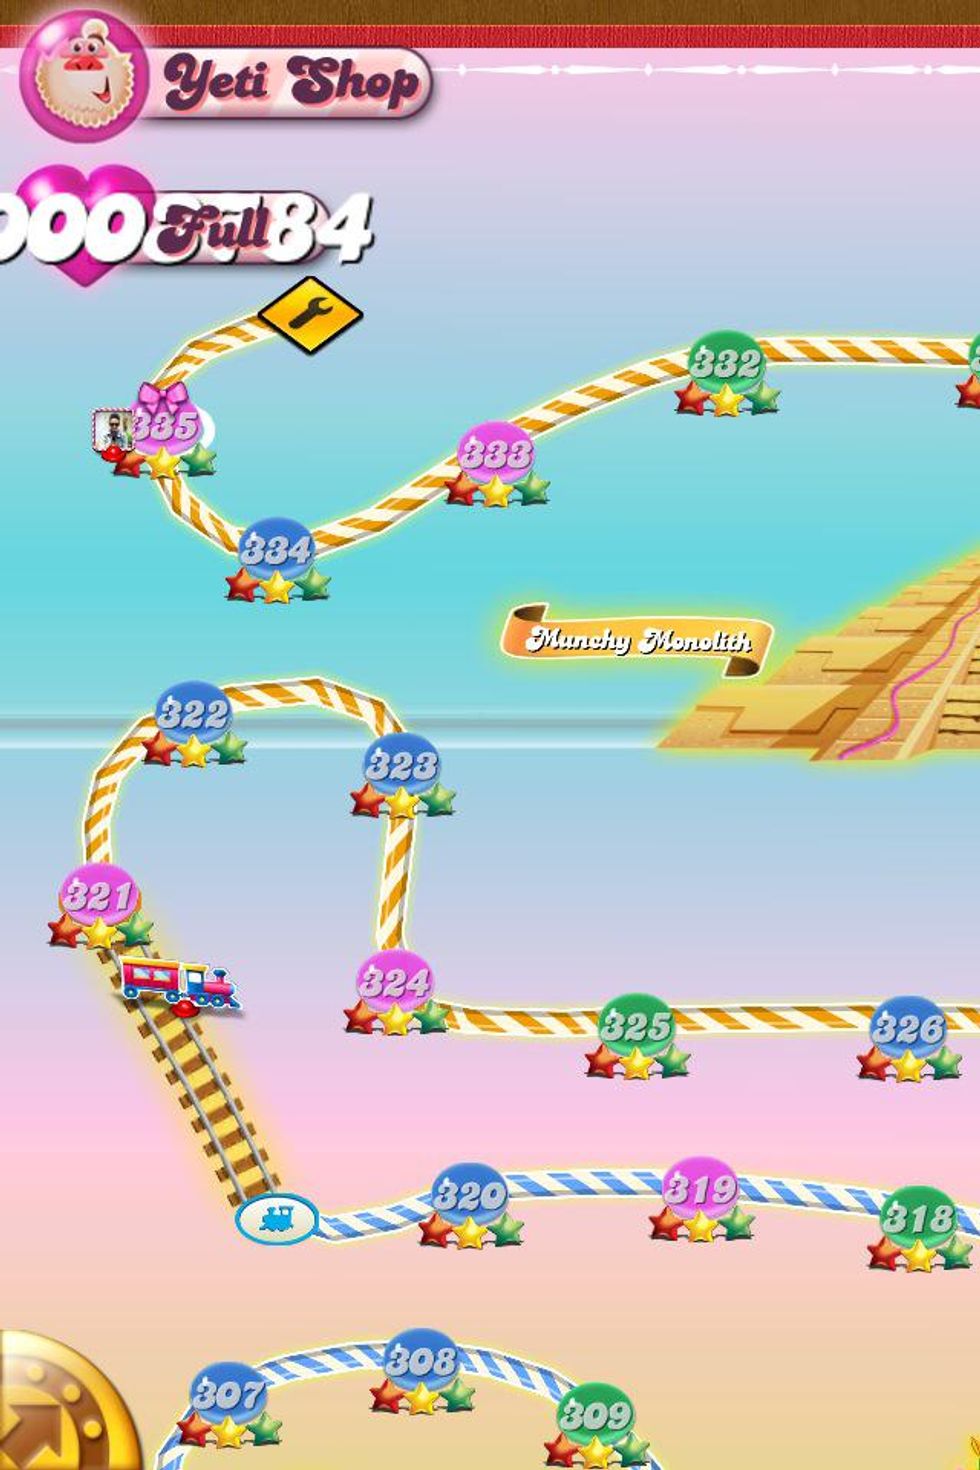 How to Hack Candy Crush on an IPhone -- NO JAILBREAK NEEDED